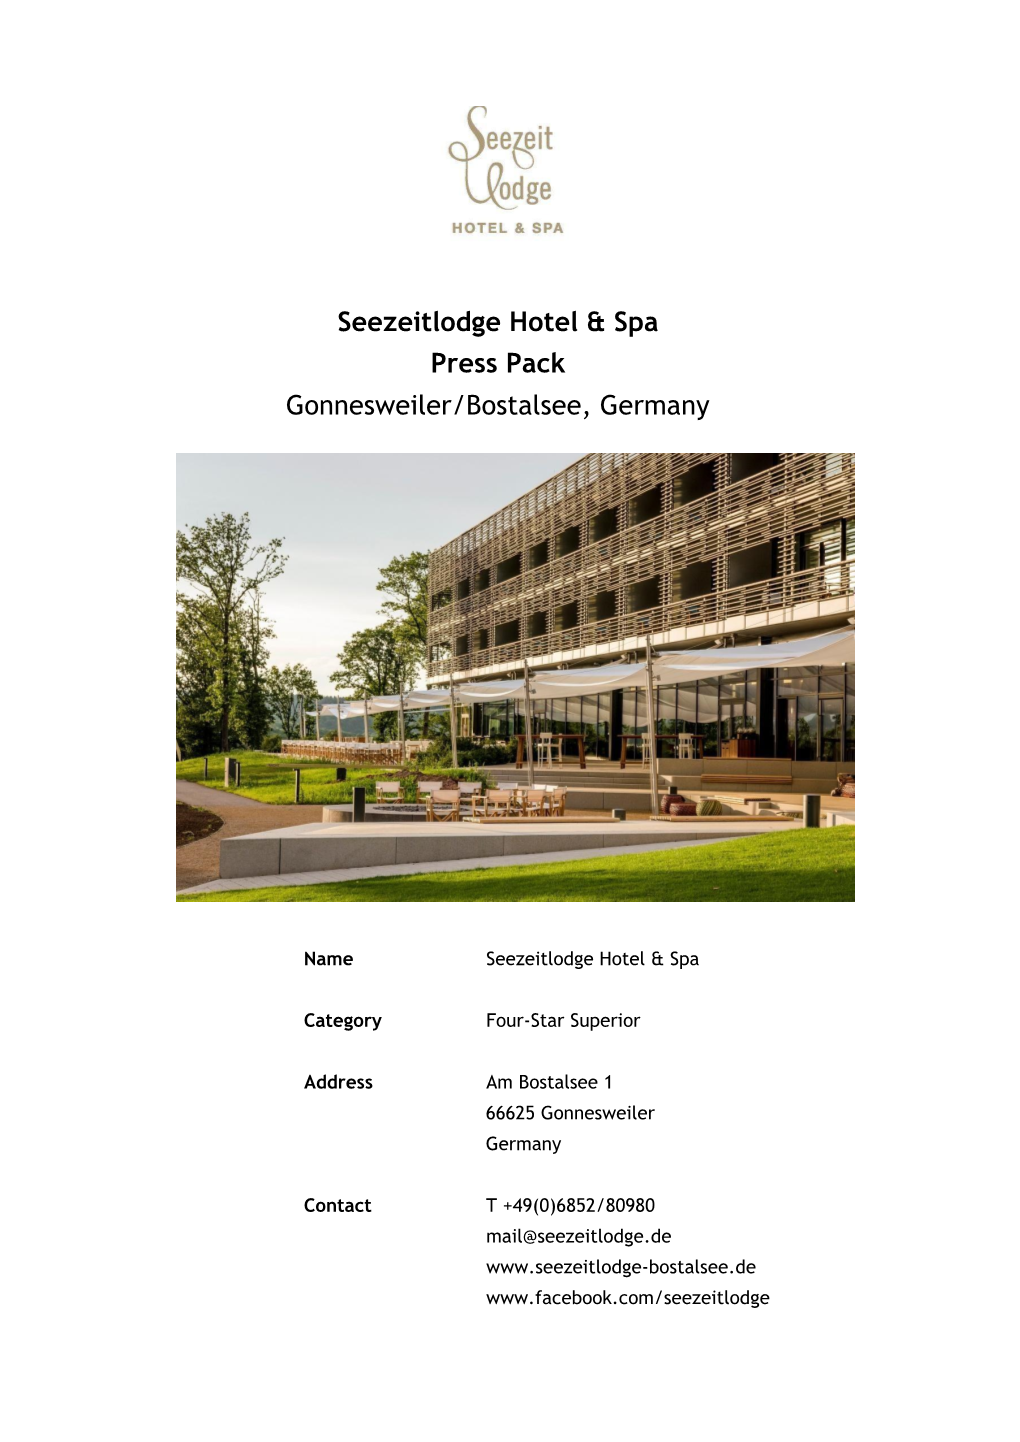 Seezeitlodge Hotel & Spa Press Pack Gonnesweiler/Bostalsee, Germany